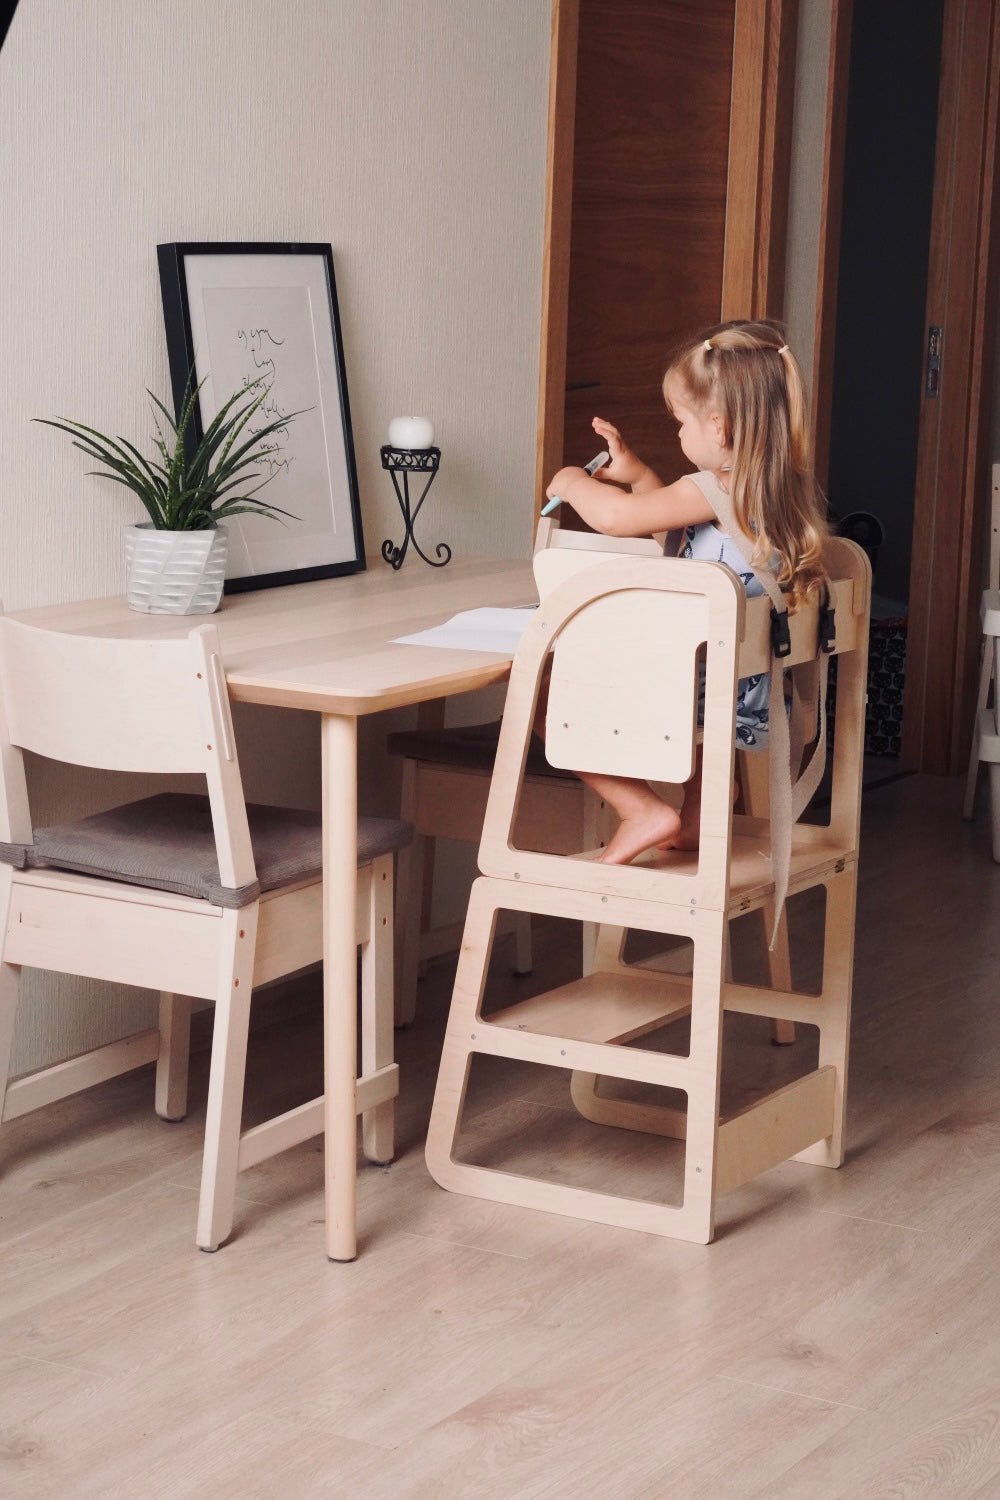 Addon1 - 3in1 High chair, step stool combo - Beloved boards